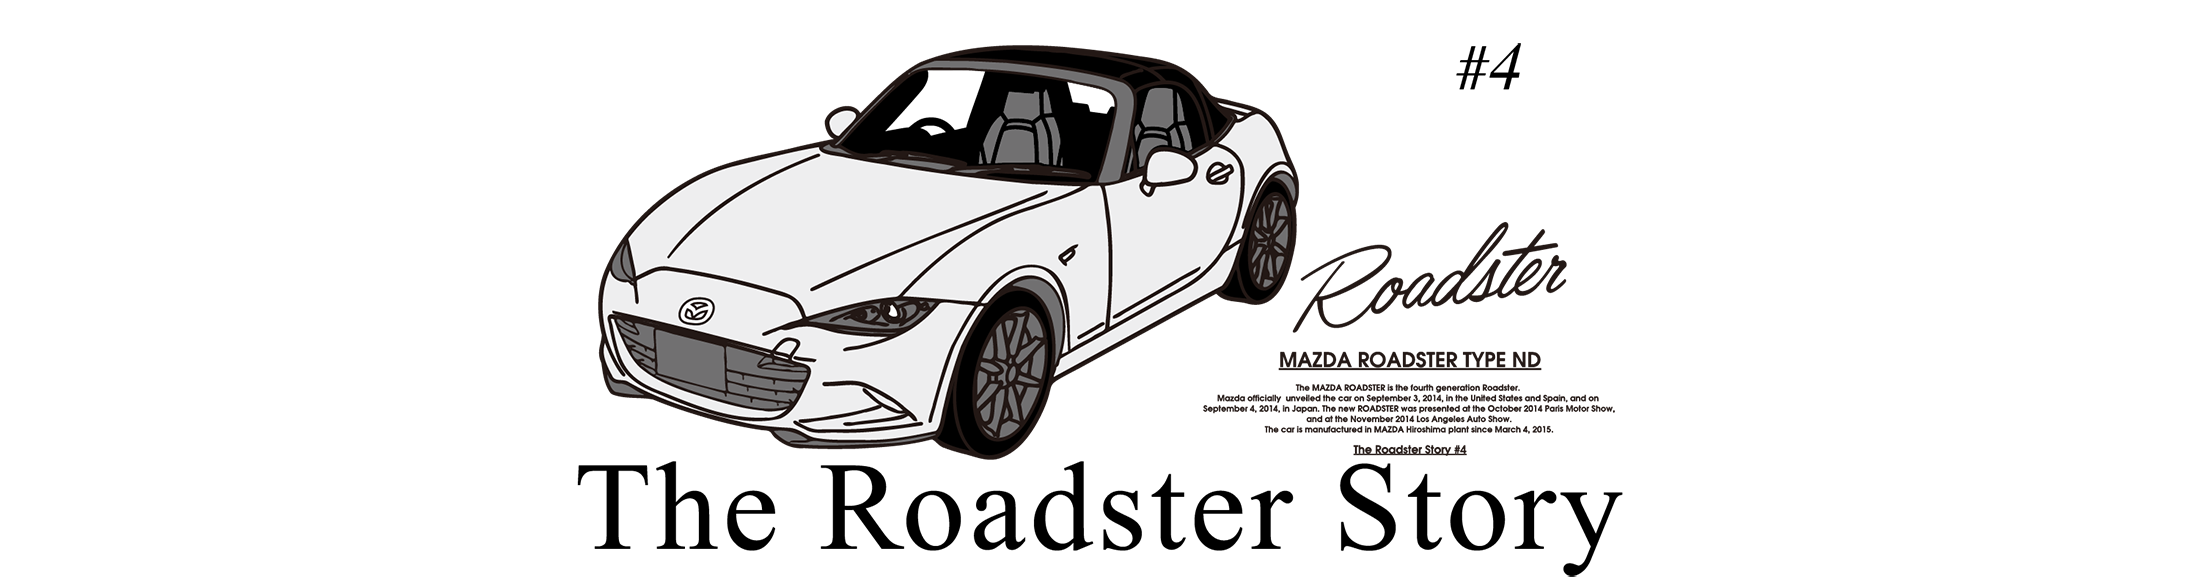 The Roadster Story #4 ND Graphics SS／ND